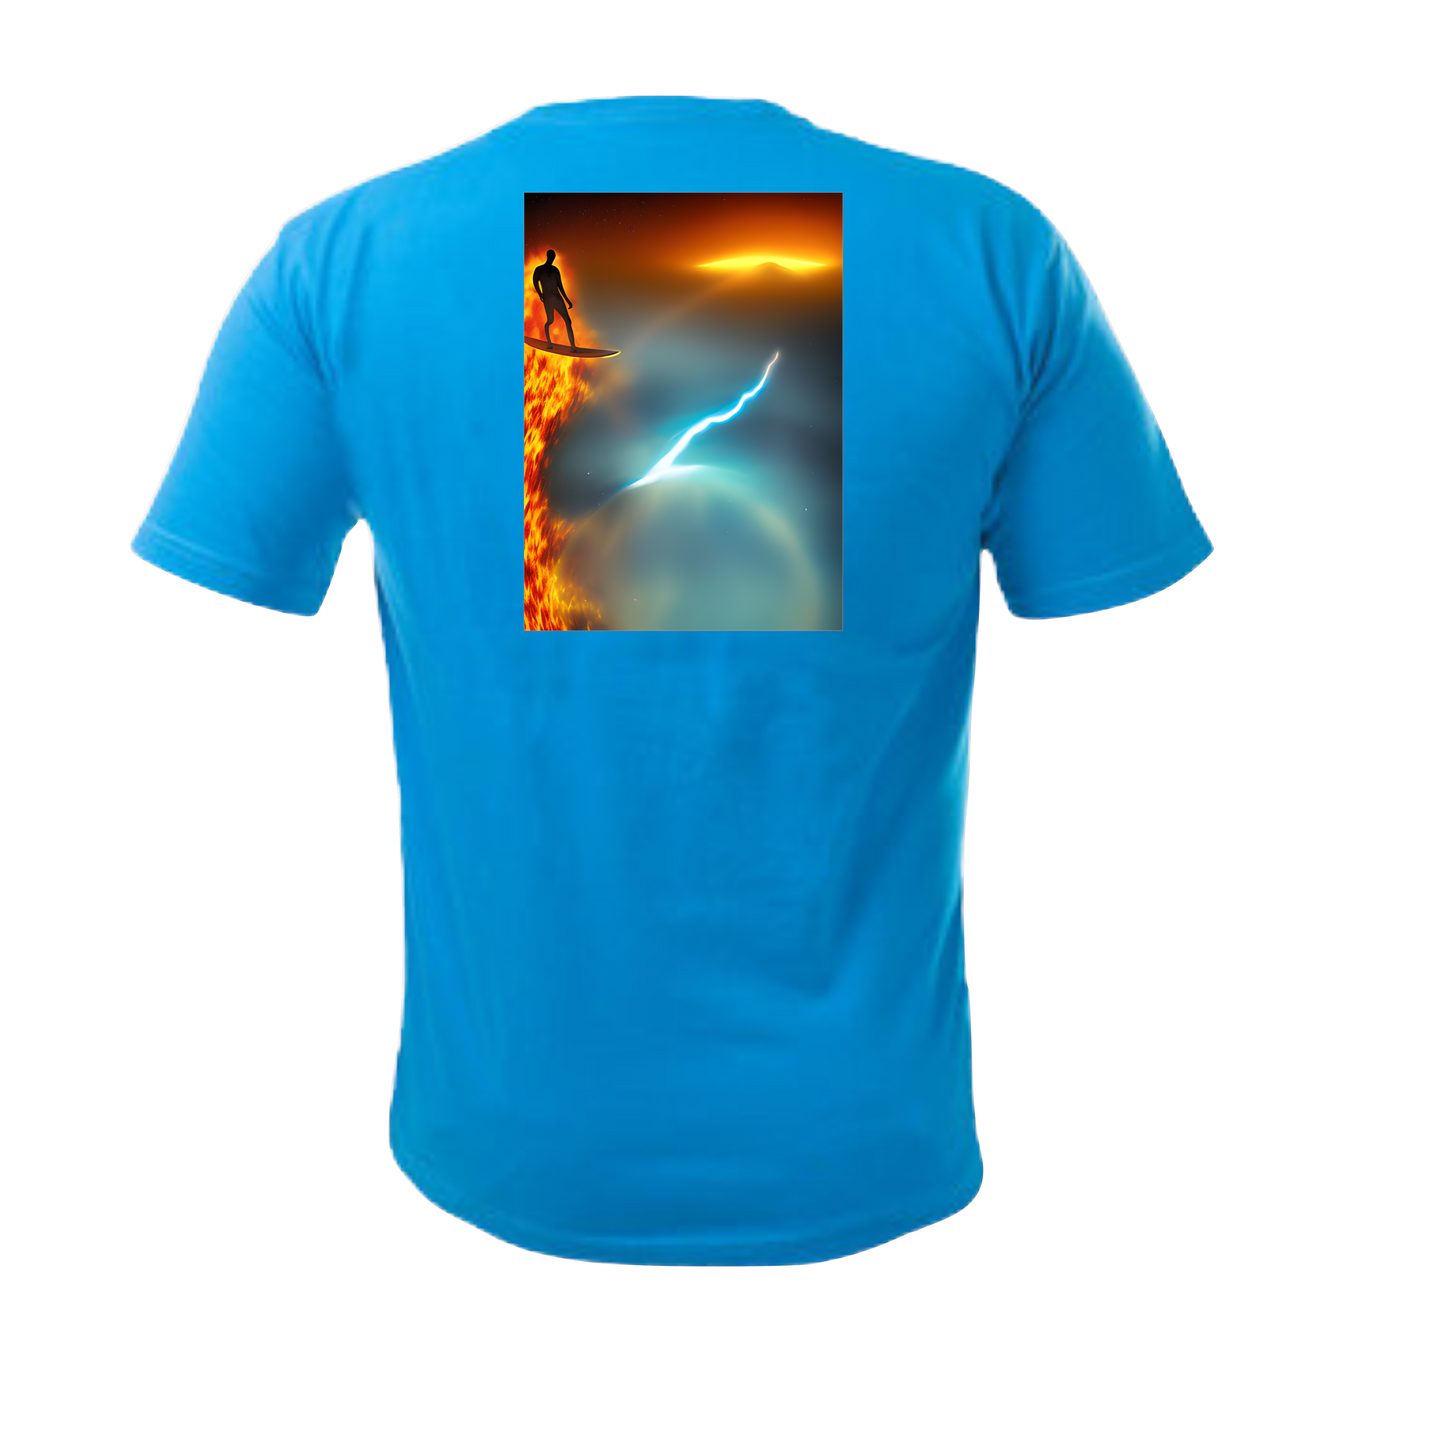 The Fire Surfer Unisex Short Sleeve T-shirt Front And Back Print